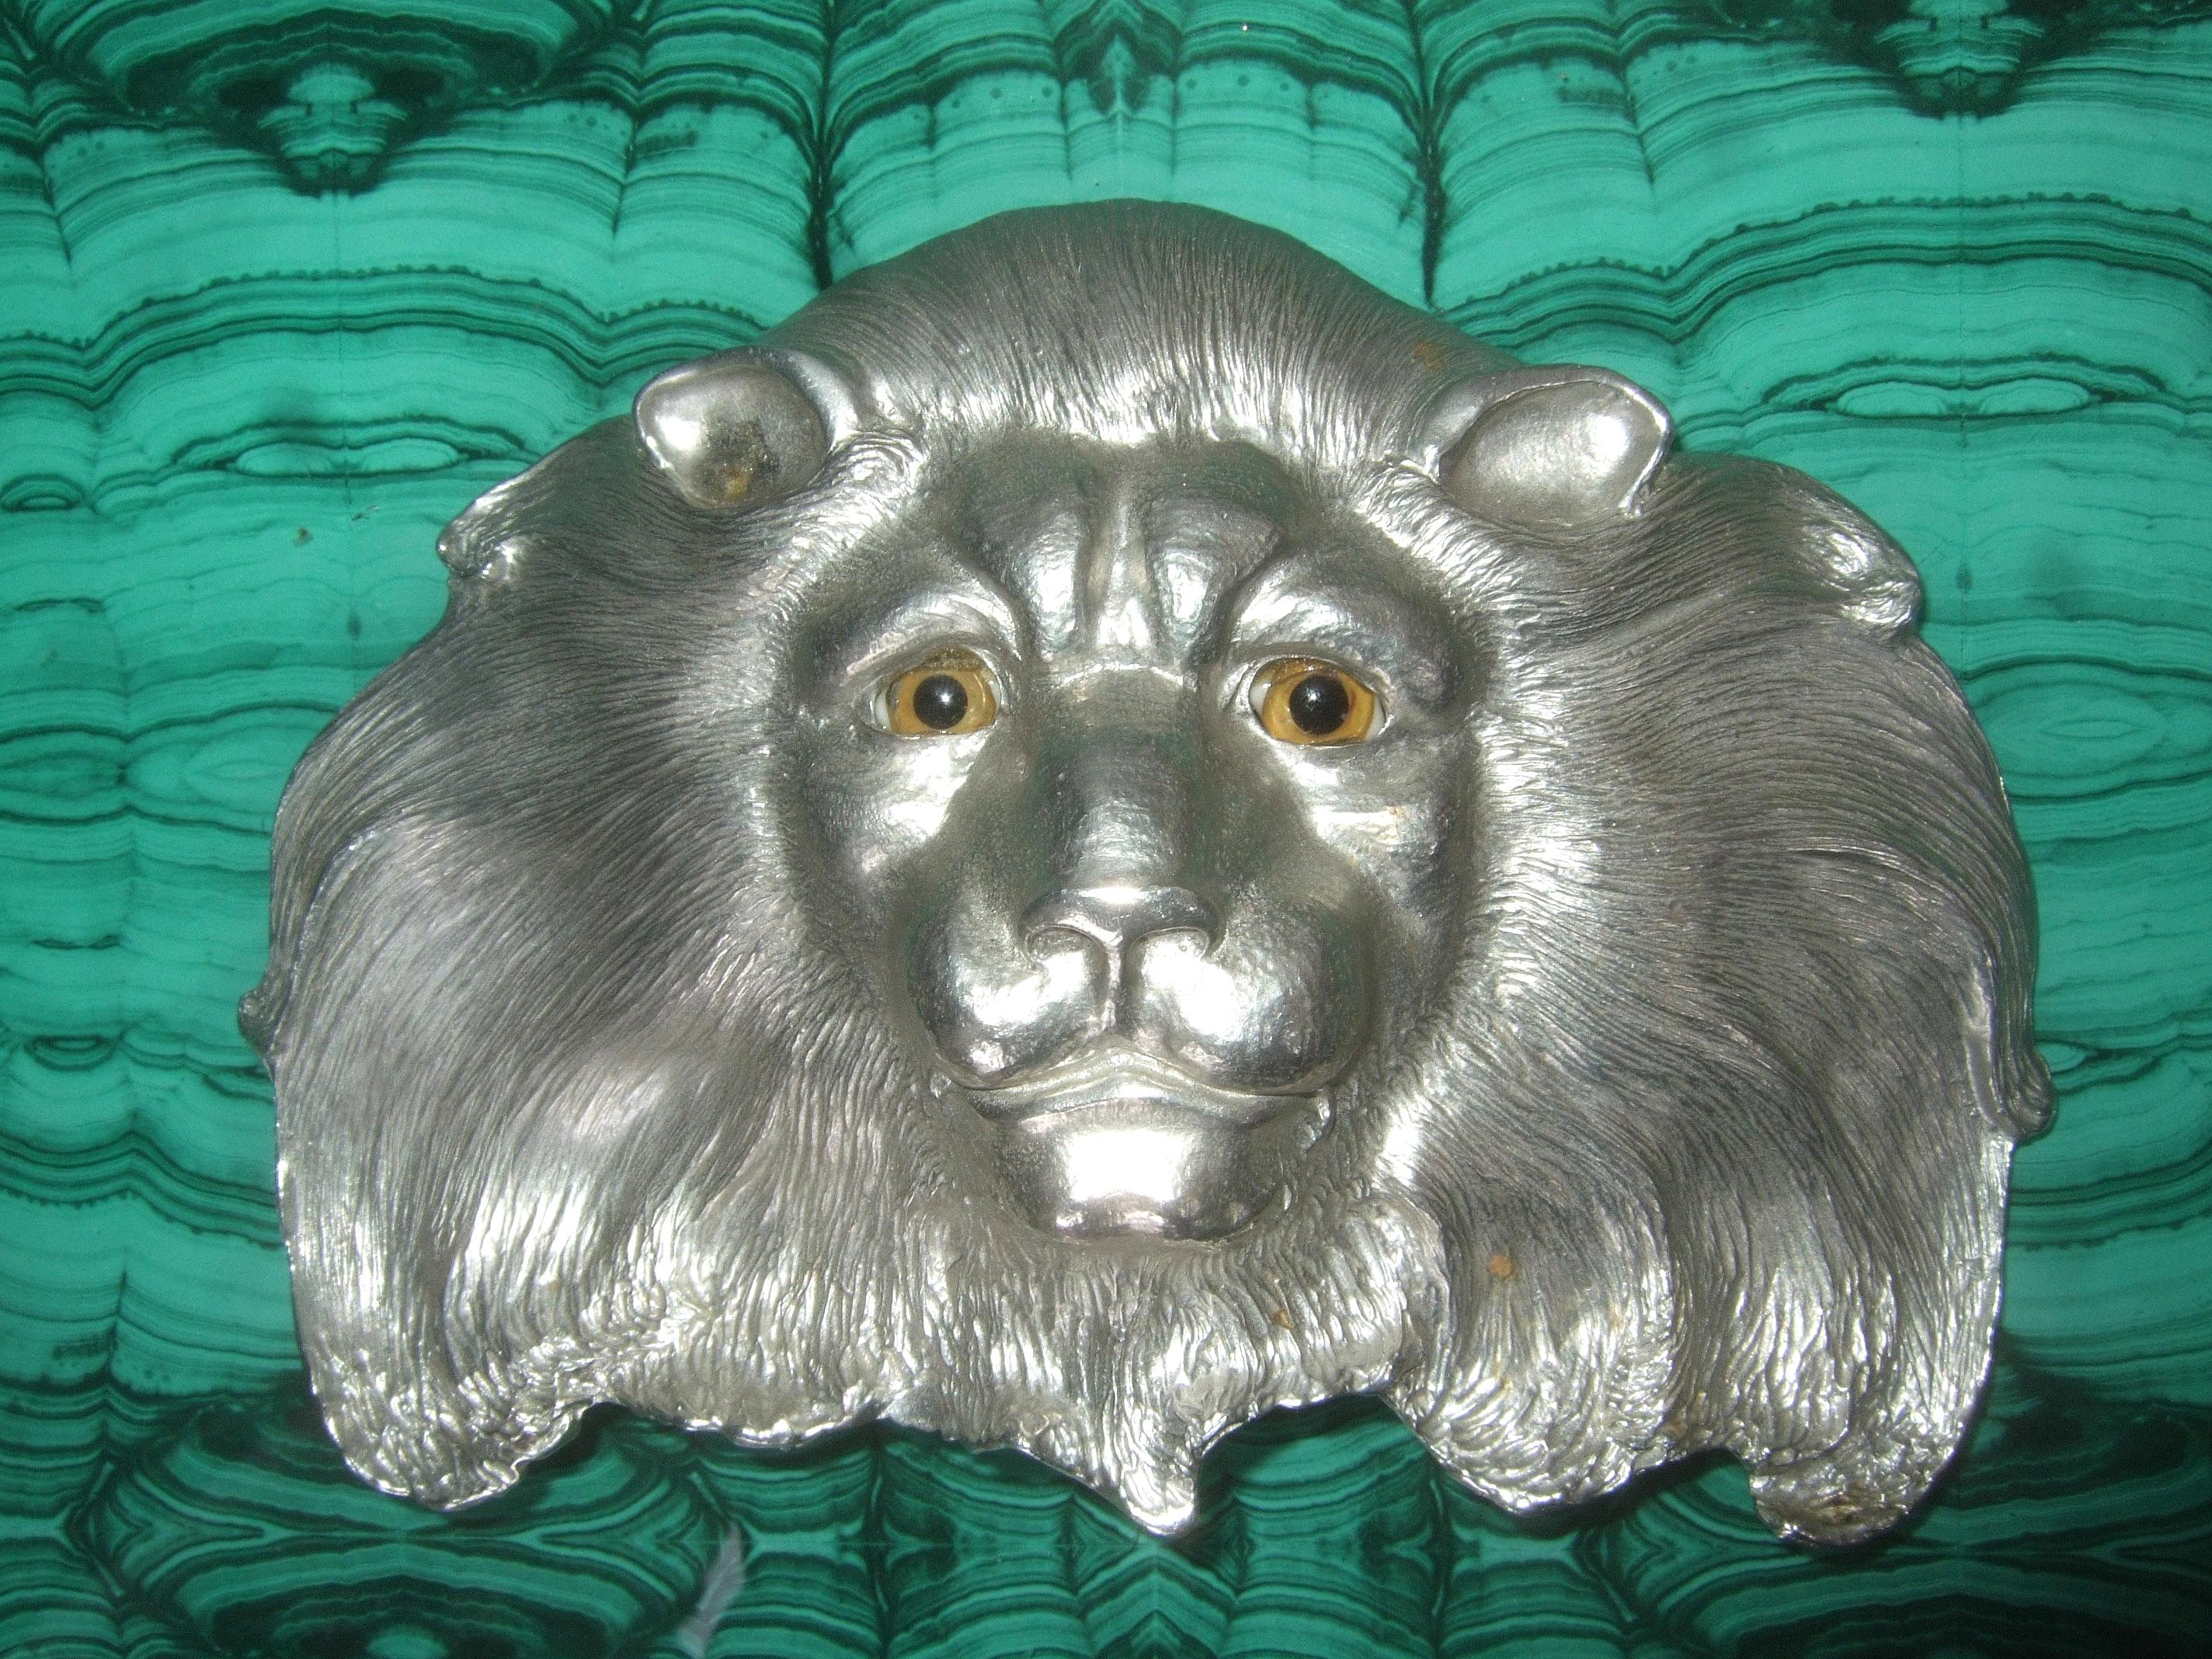 Christopher Ross Massive huge scale artisan silver matte metal lion belt buckle c 1984
The dramatic enormous size belt buckle is designed with a stylized lion's face
The sinuous impressed etched detail emulates the lion's mane 

Adorned with a pair